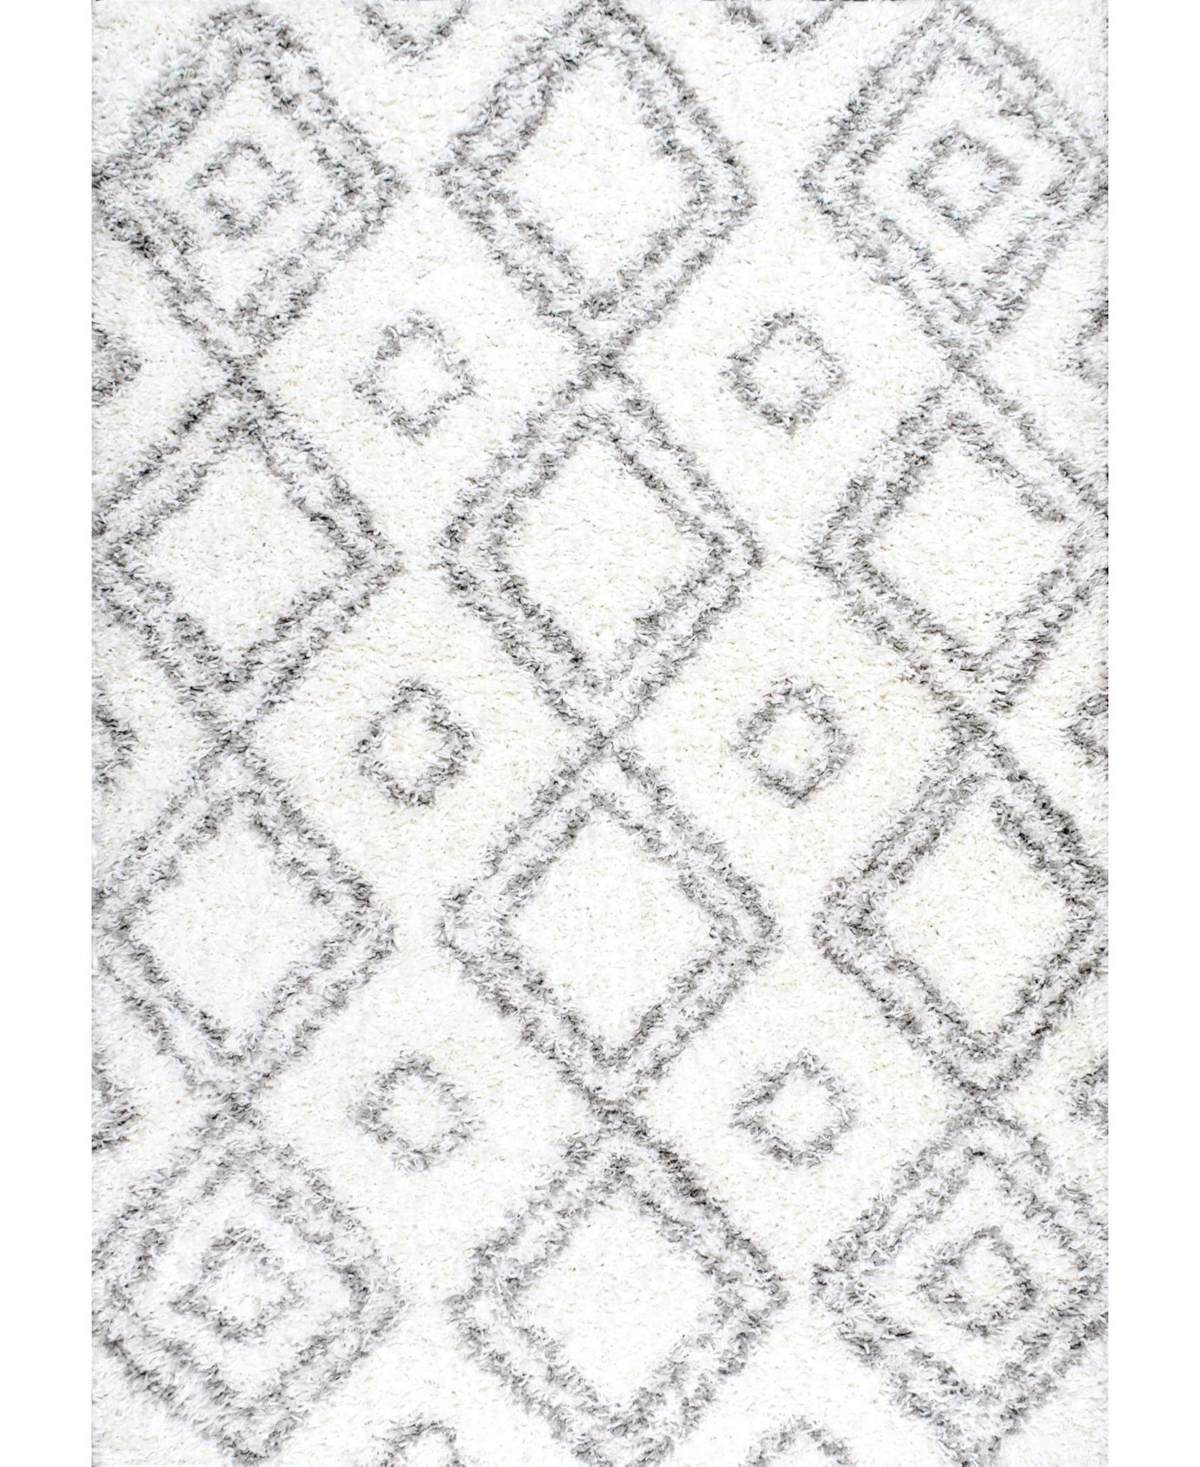 nuLoom Iola OZSG18A White 6'7in x 9' Area Rug - White